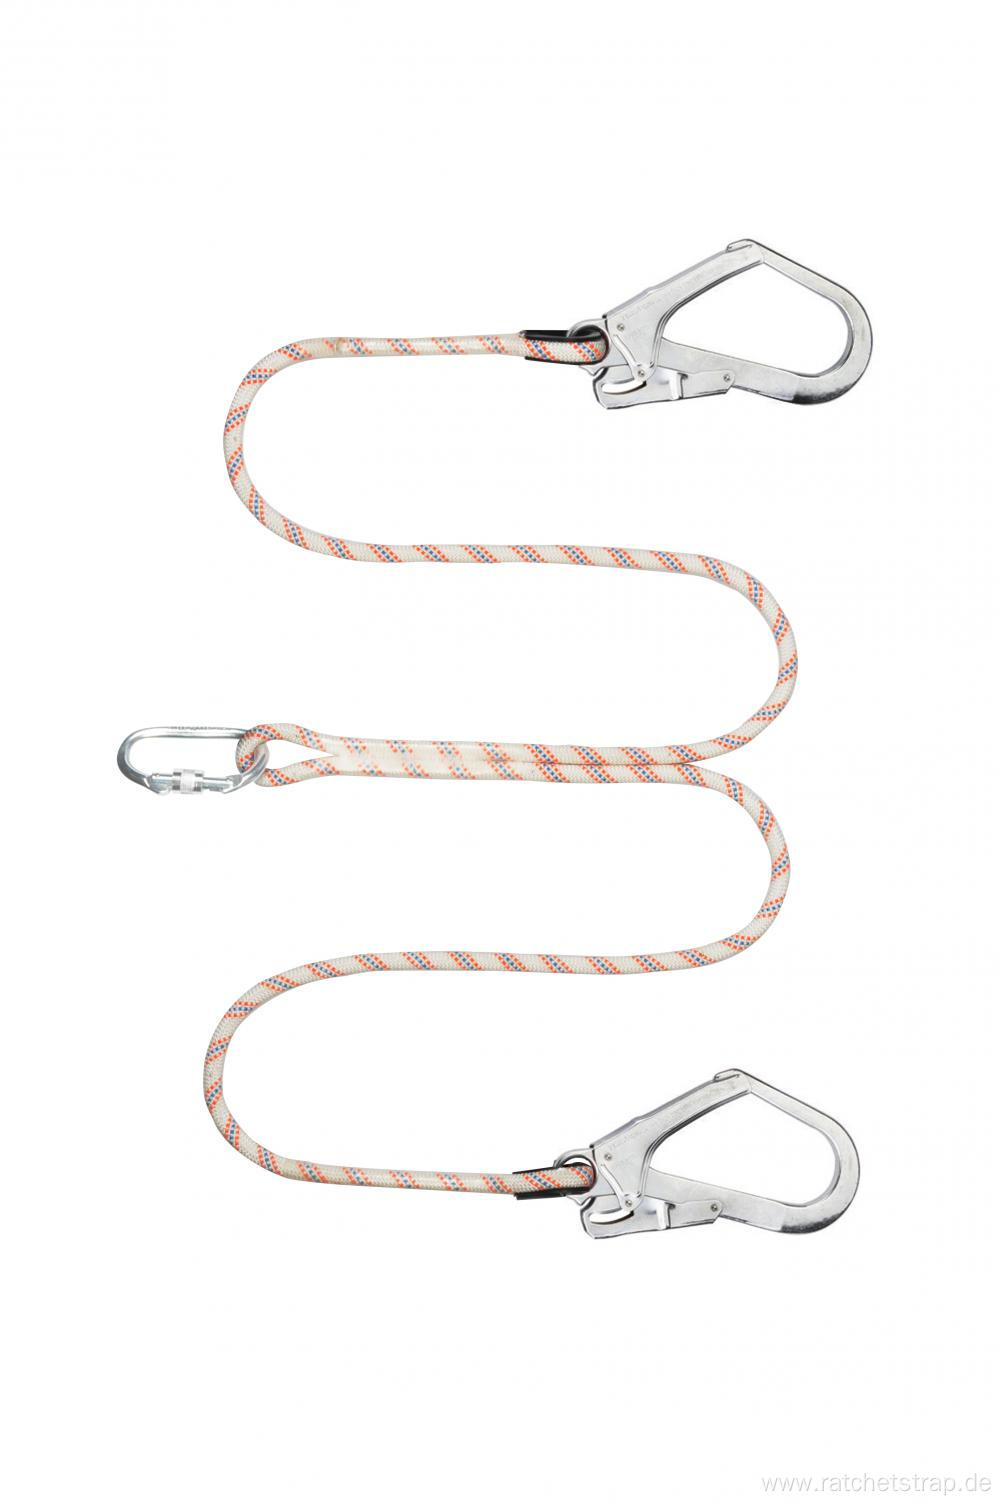 Safety Lanyard Match with Harness Fall Arrest SHL8010